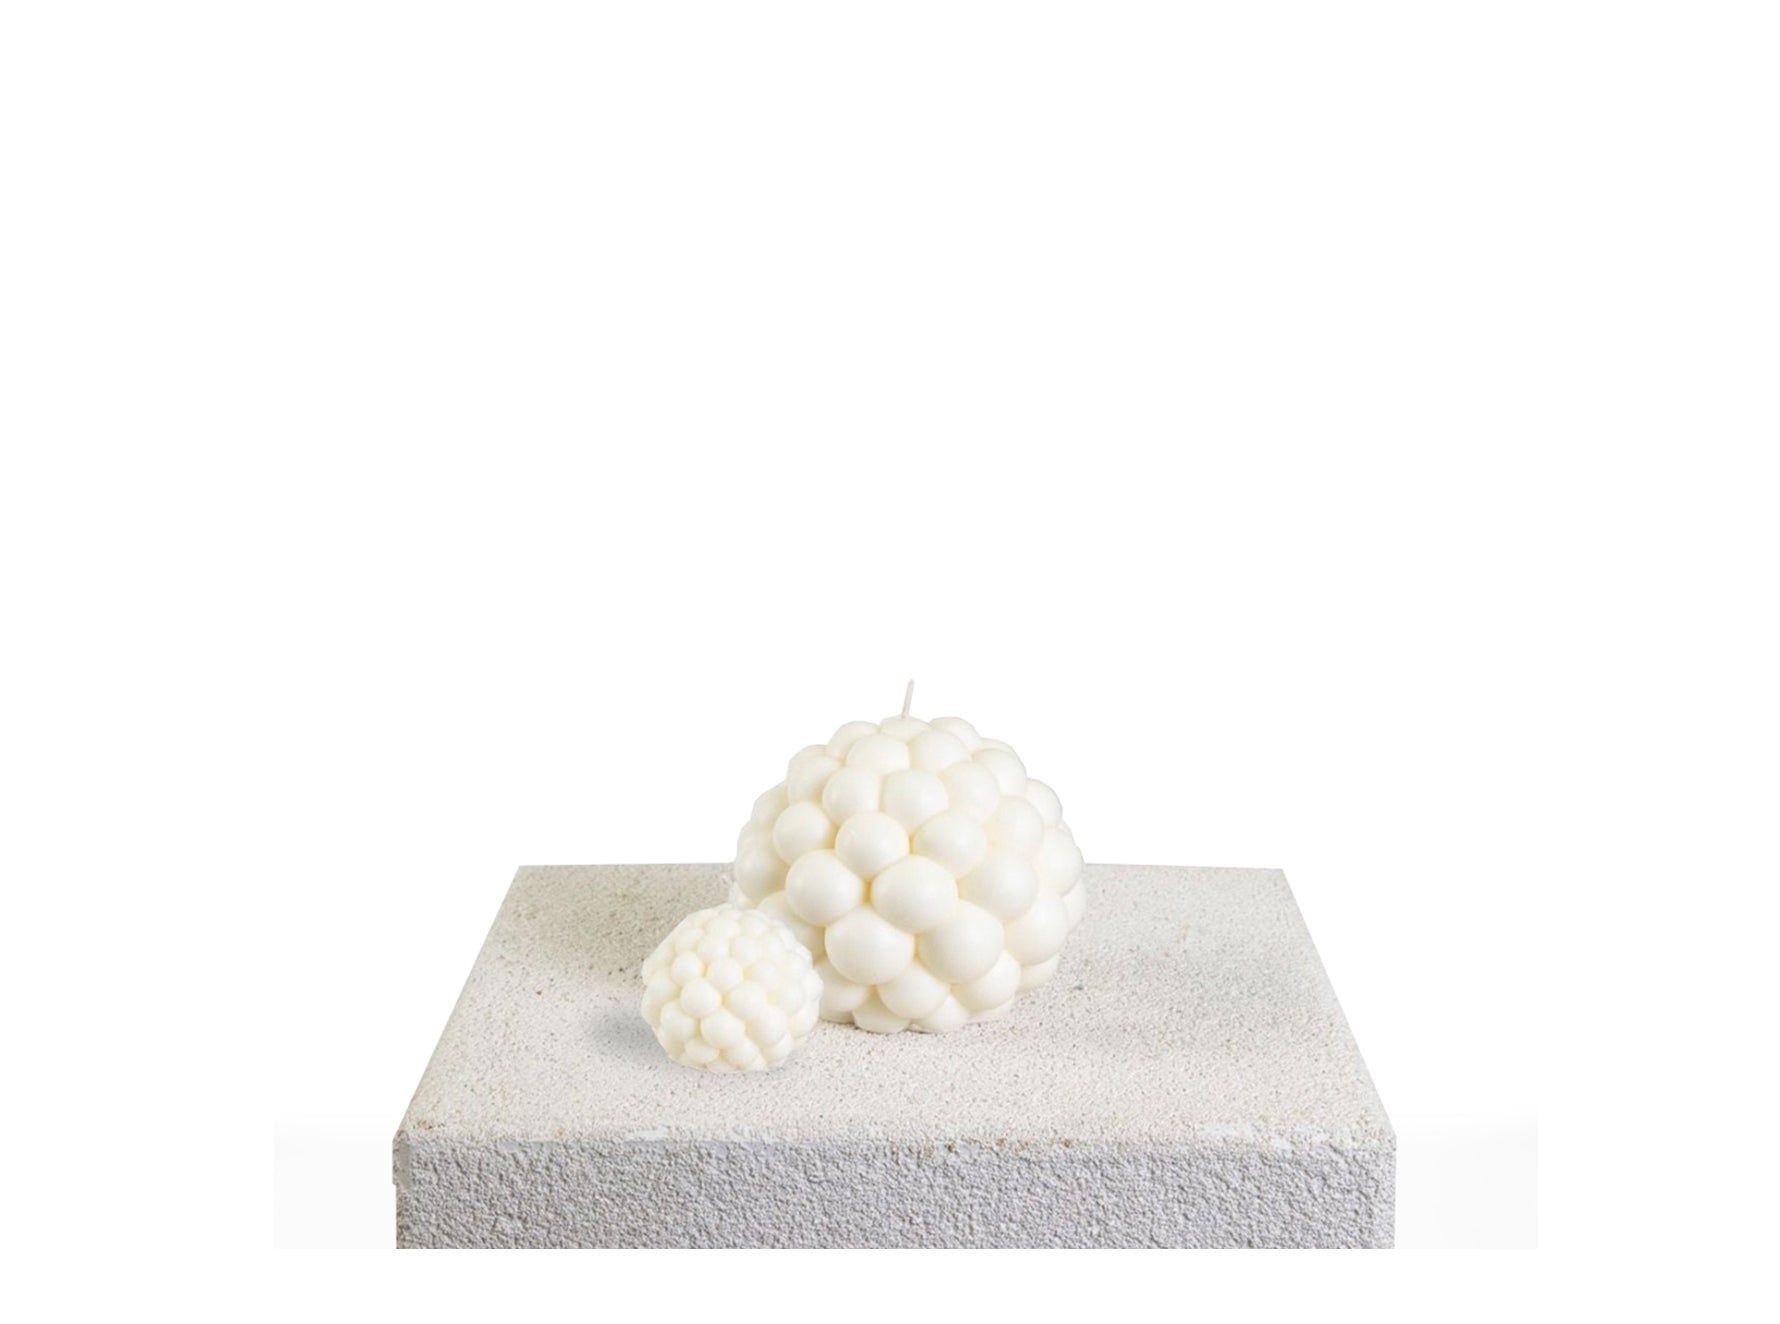 Molecule Sculptural Soy Wax Candle Collection